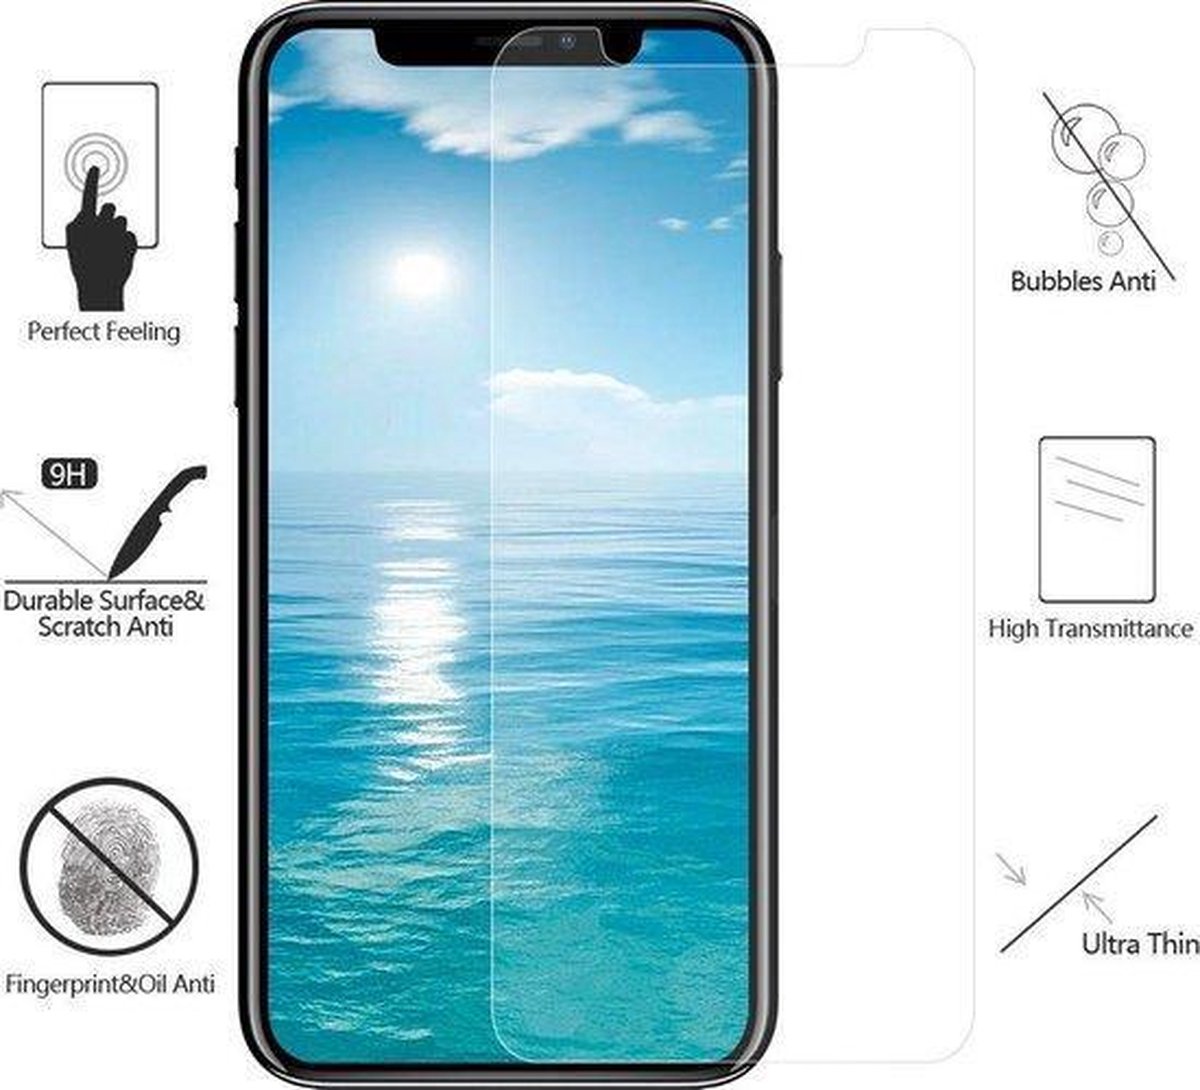 BEST QUALITY screen protector iPhone 6/6S/7/8